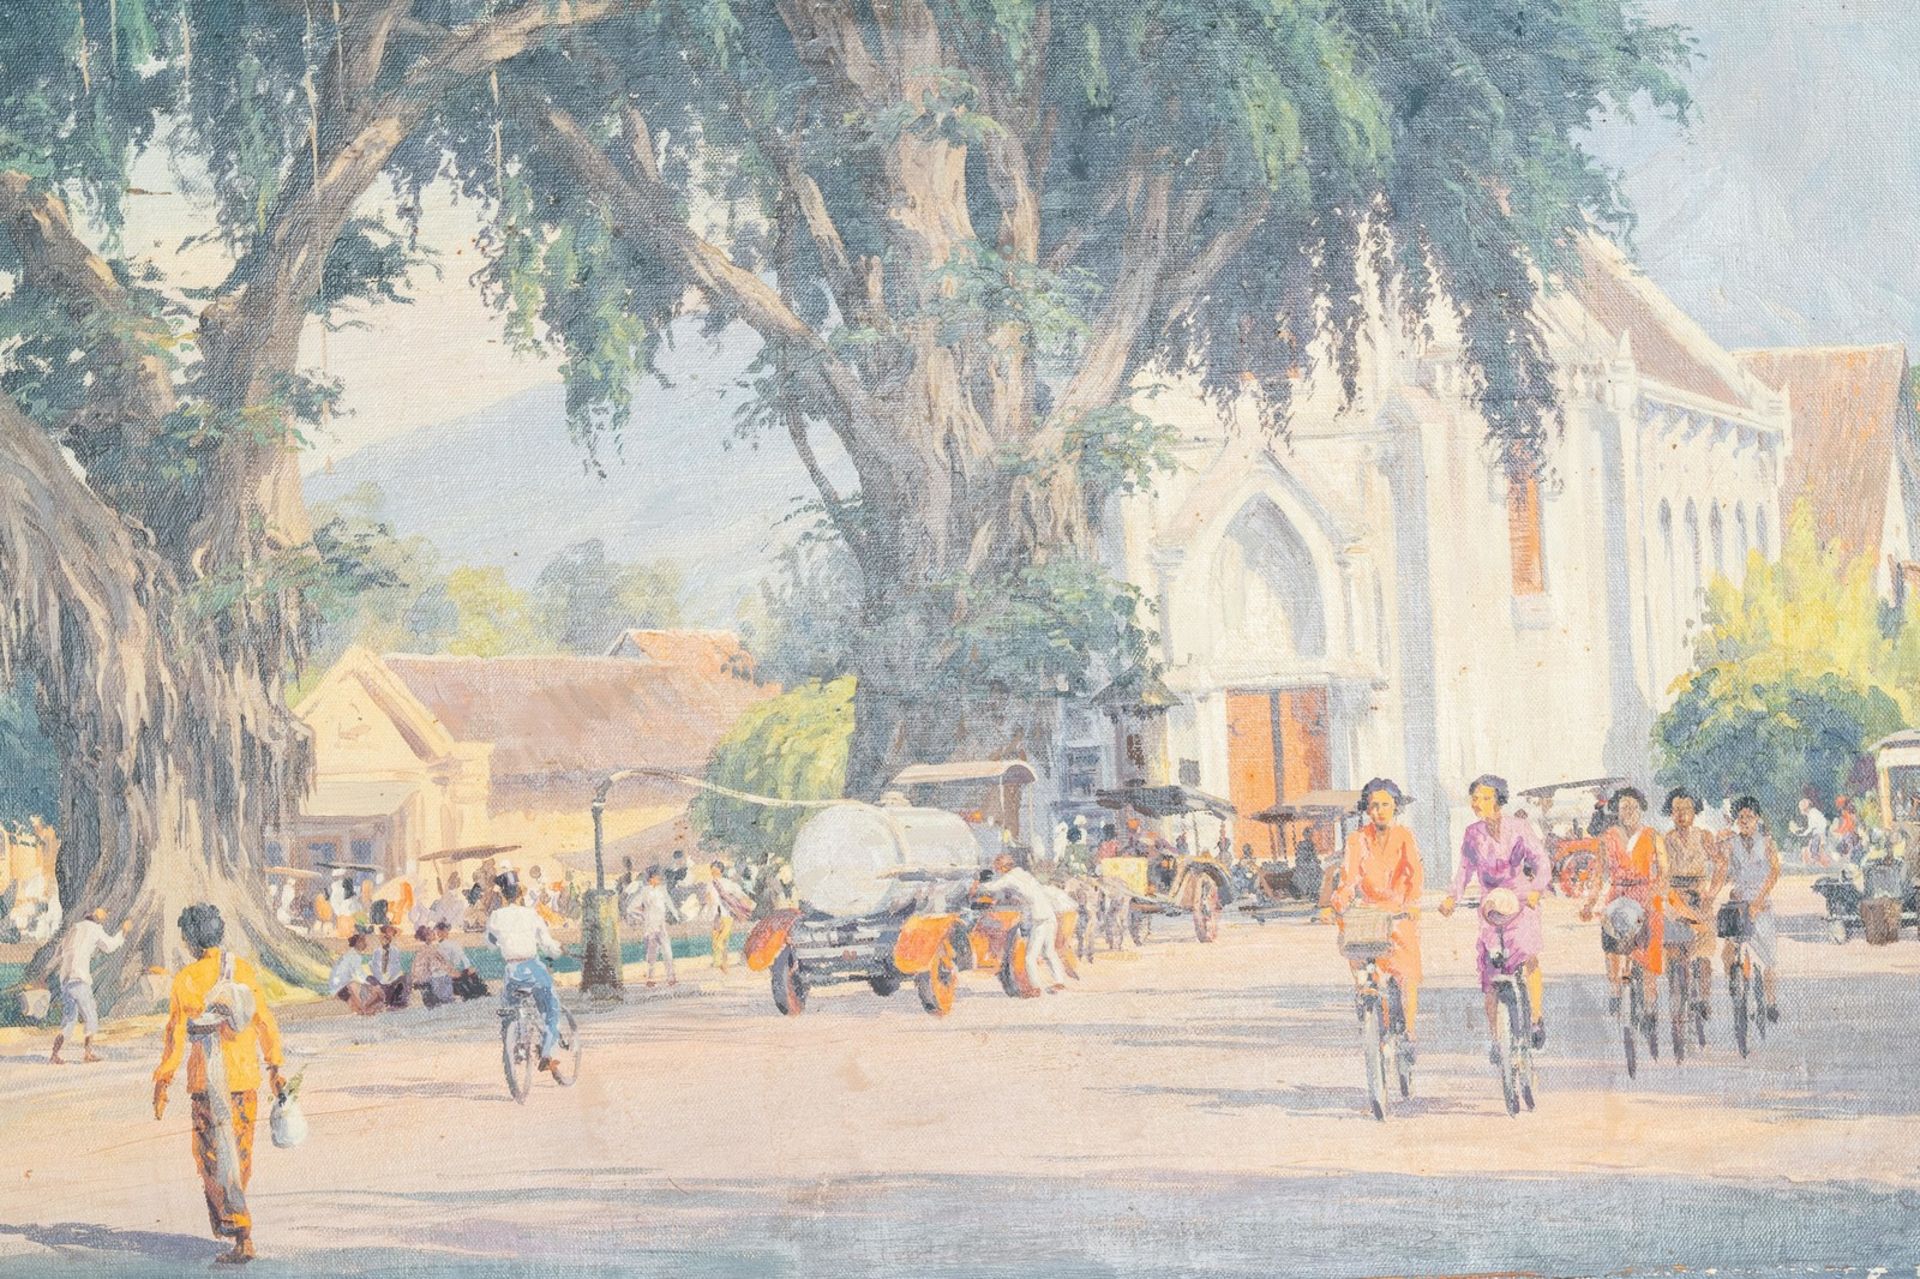 Willem Jan Pieter van der Does (1889-1966), oil on canvas: 'A streetview in Bali' - Image 4 of 7